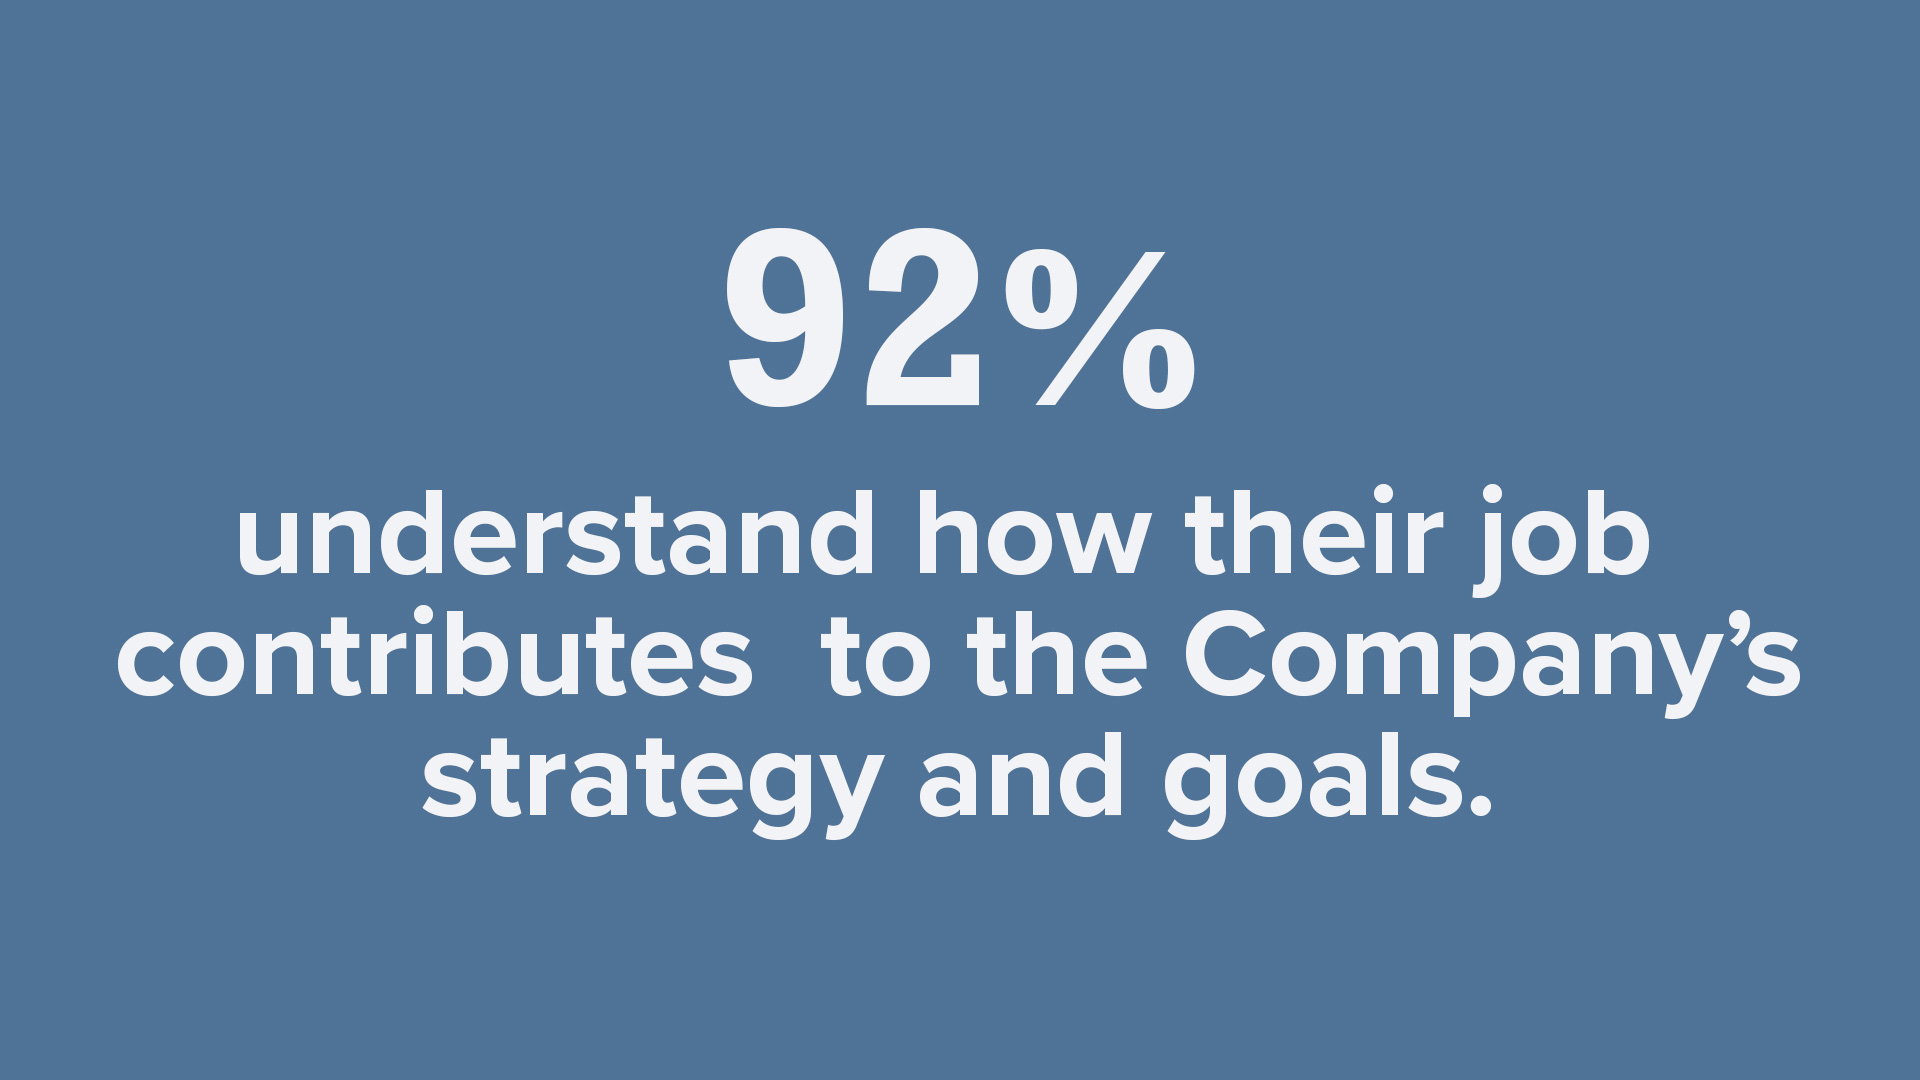 92% understand how their job contributes to the Company's strategy and goals.